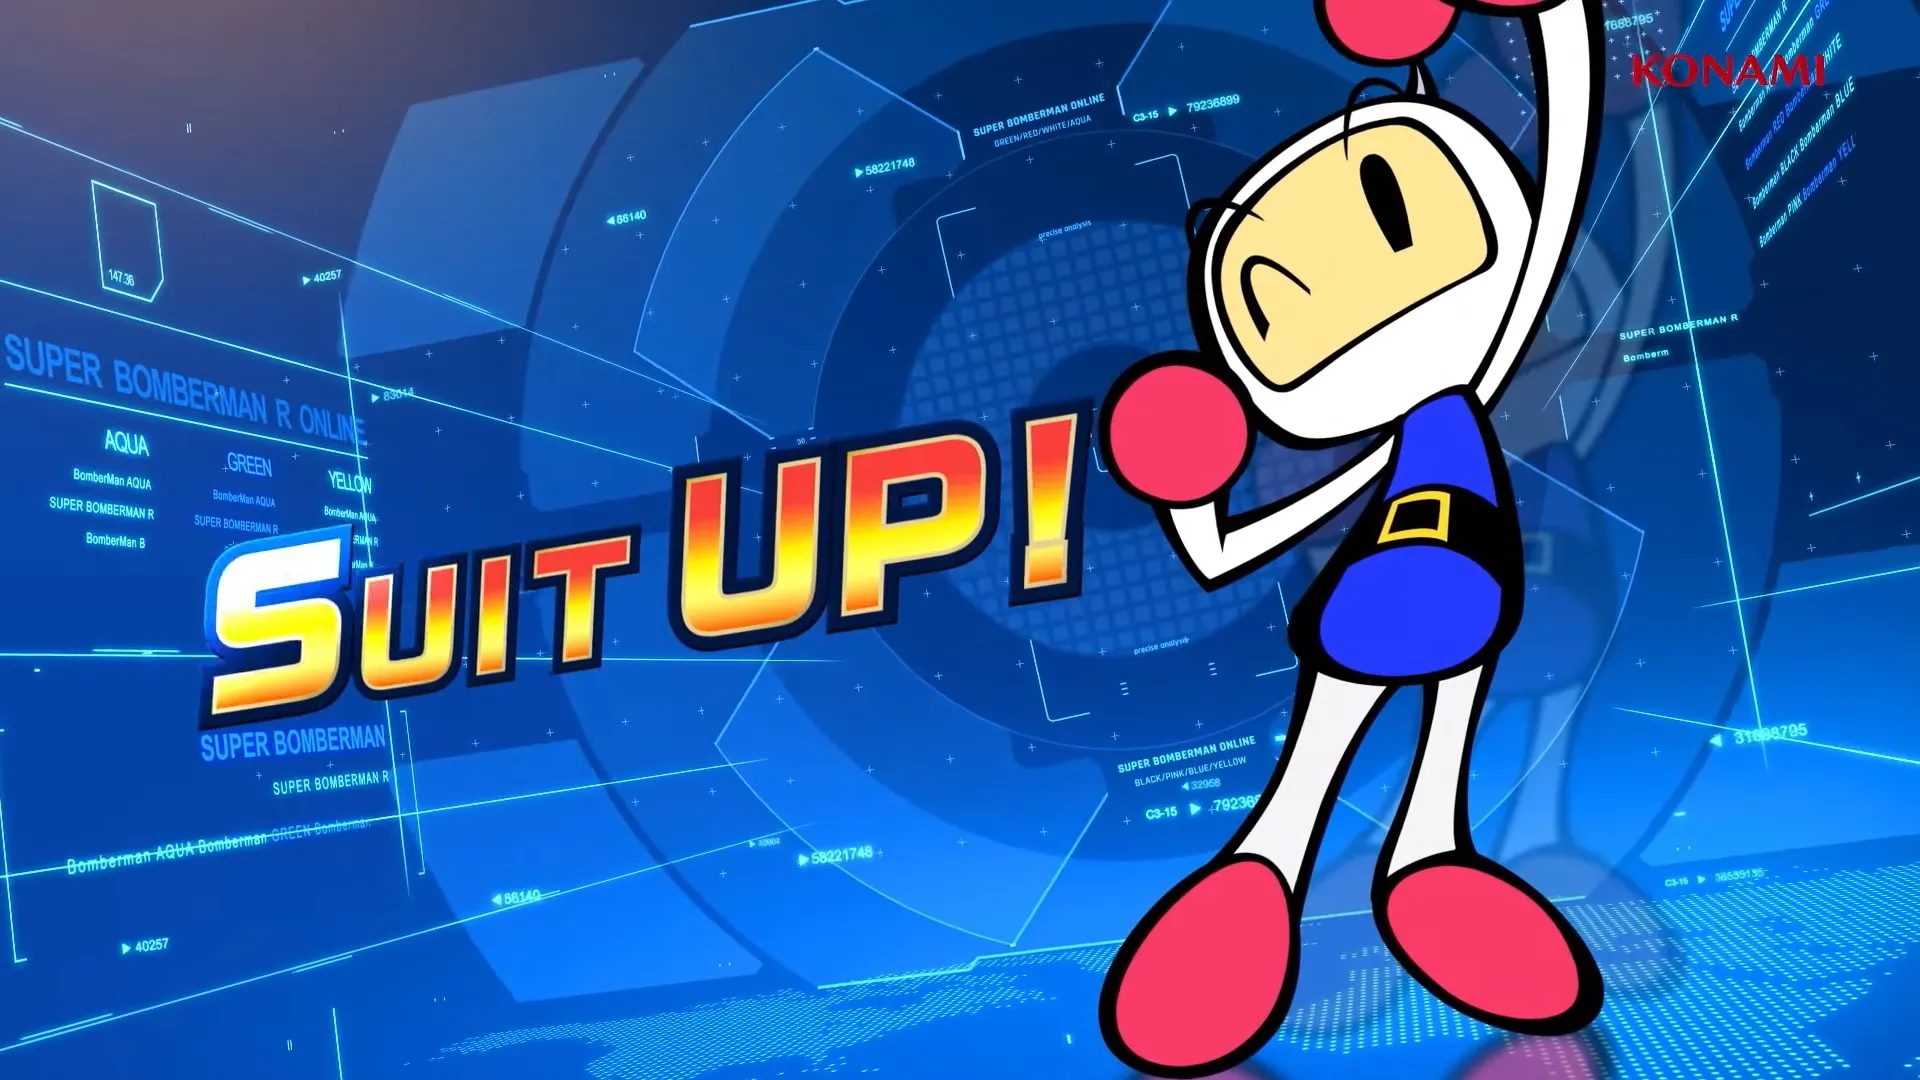 I tried playing 'Super Bomberman R Online' where you can enjoy an